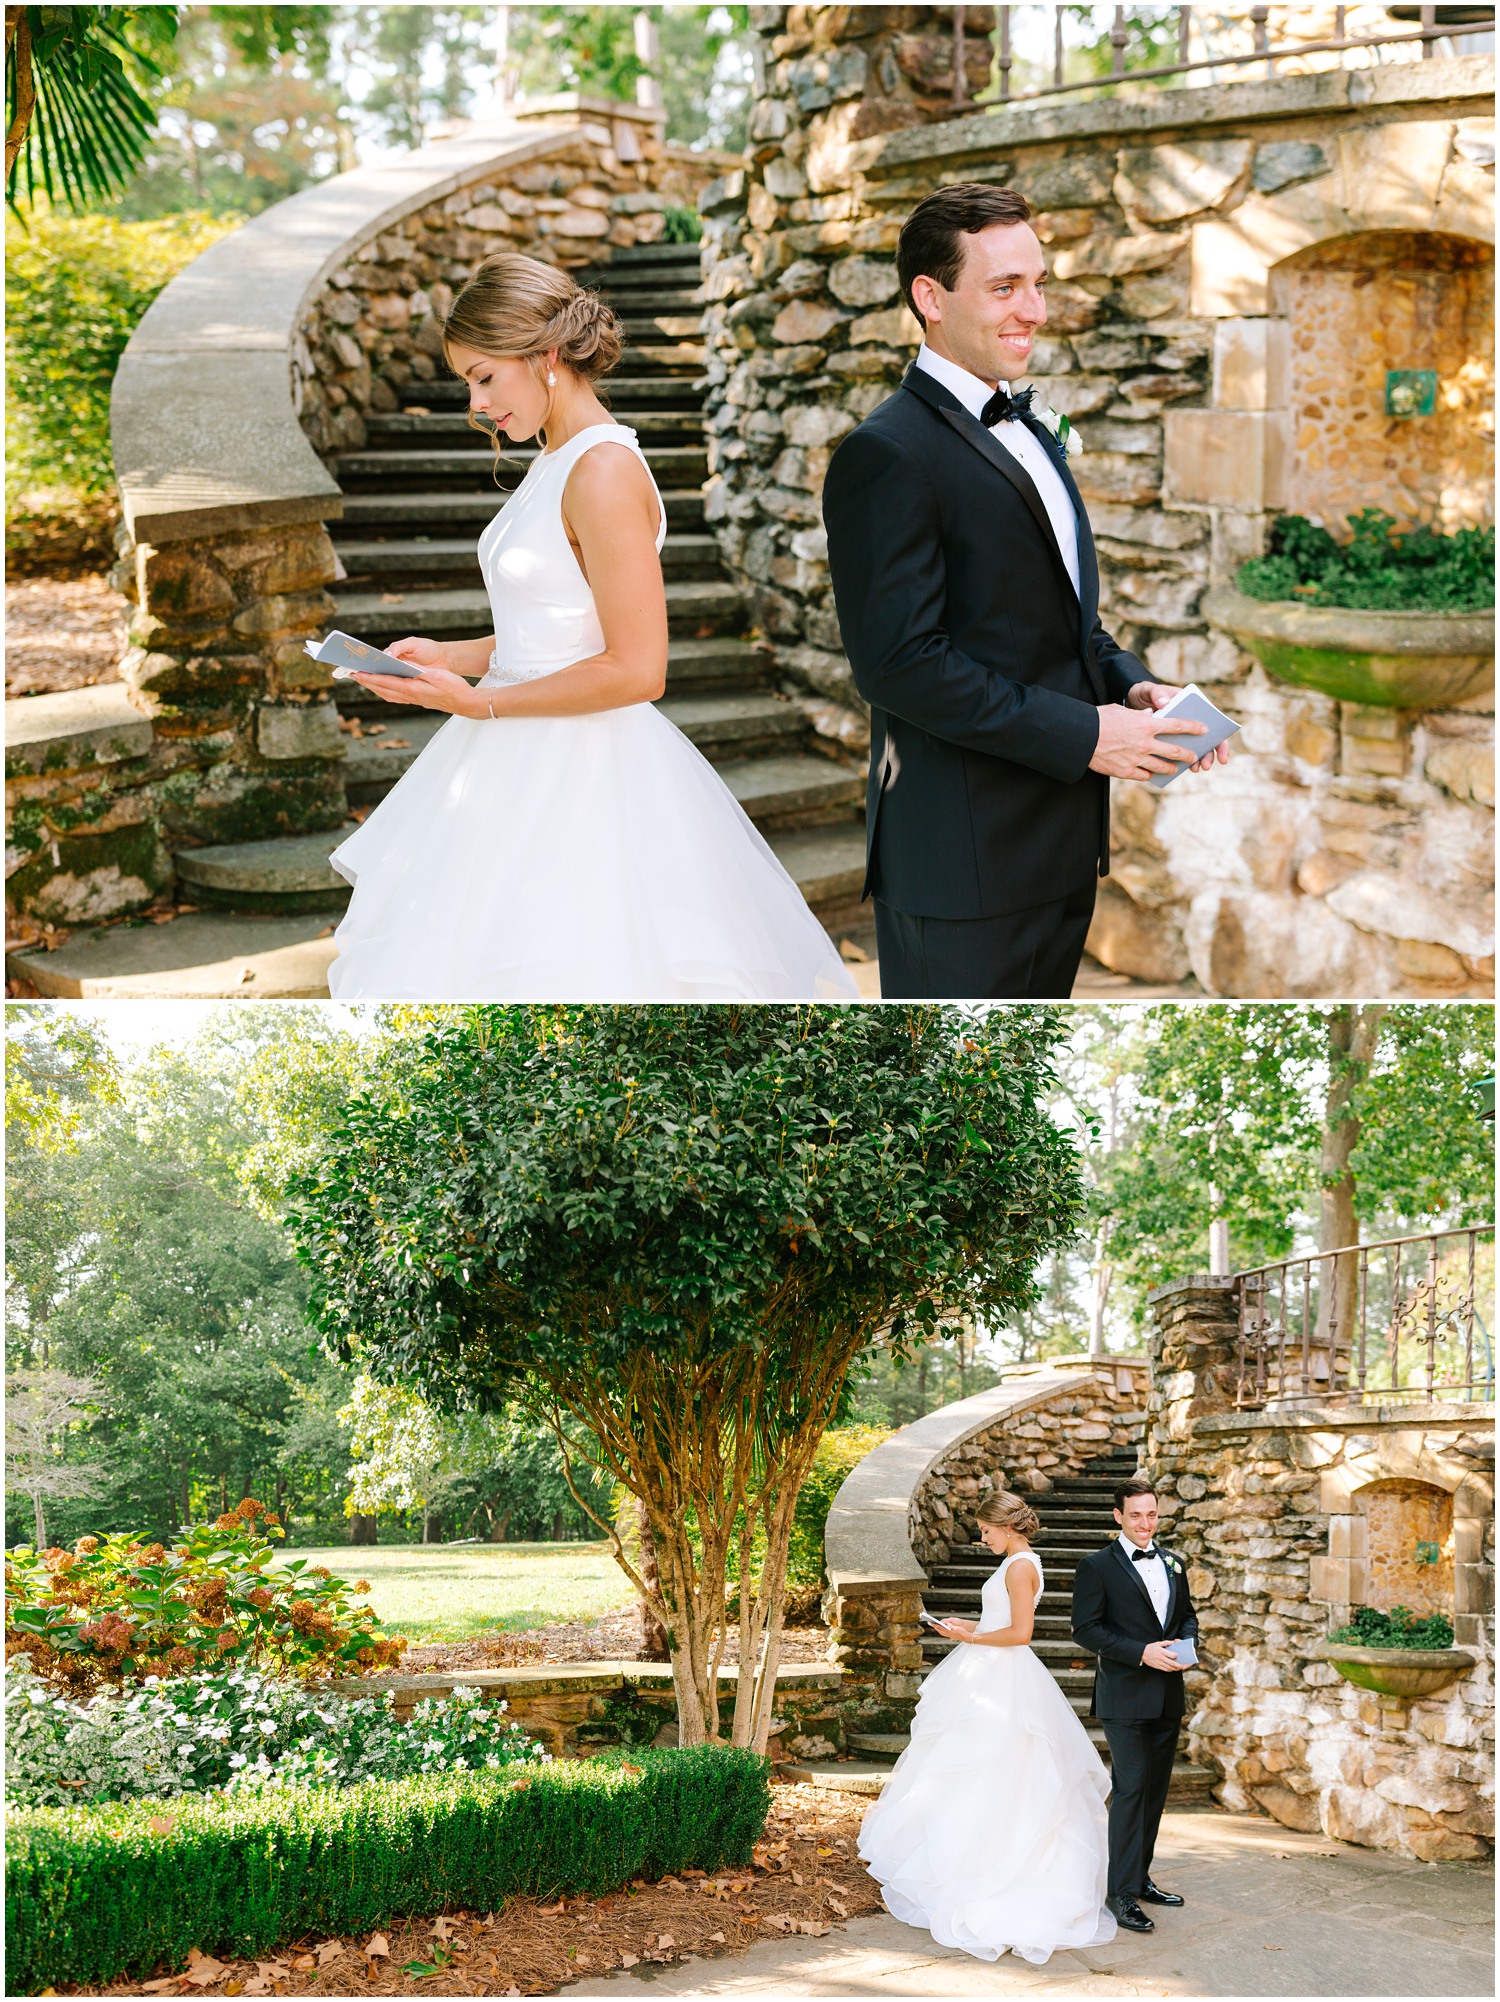 Winston-Salem NC wedding day first touch photographed by Chelsea Renay Photography